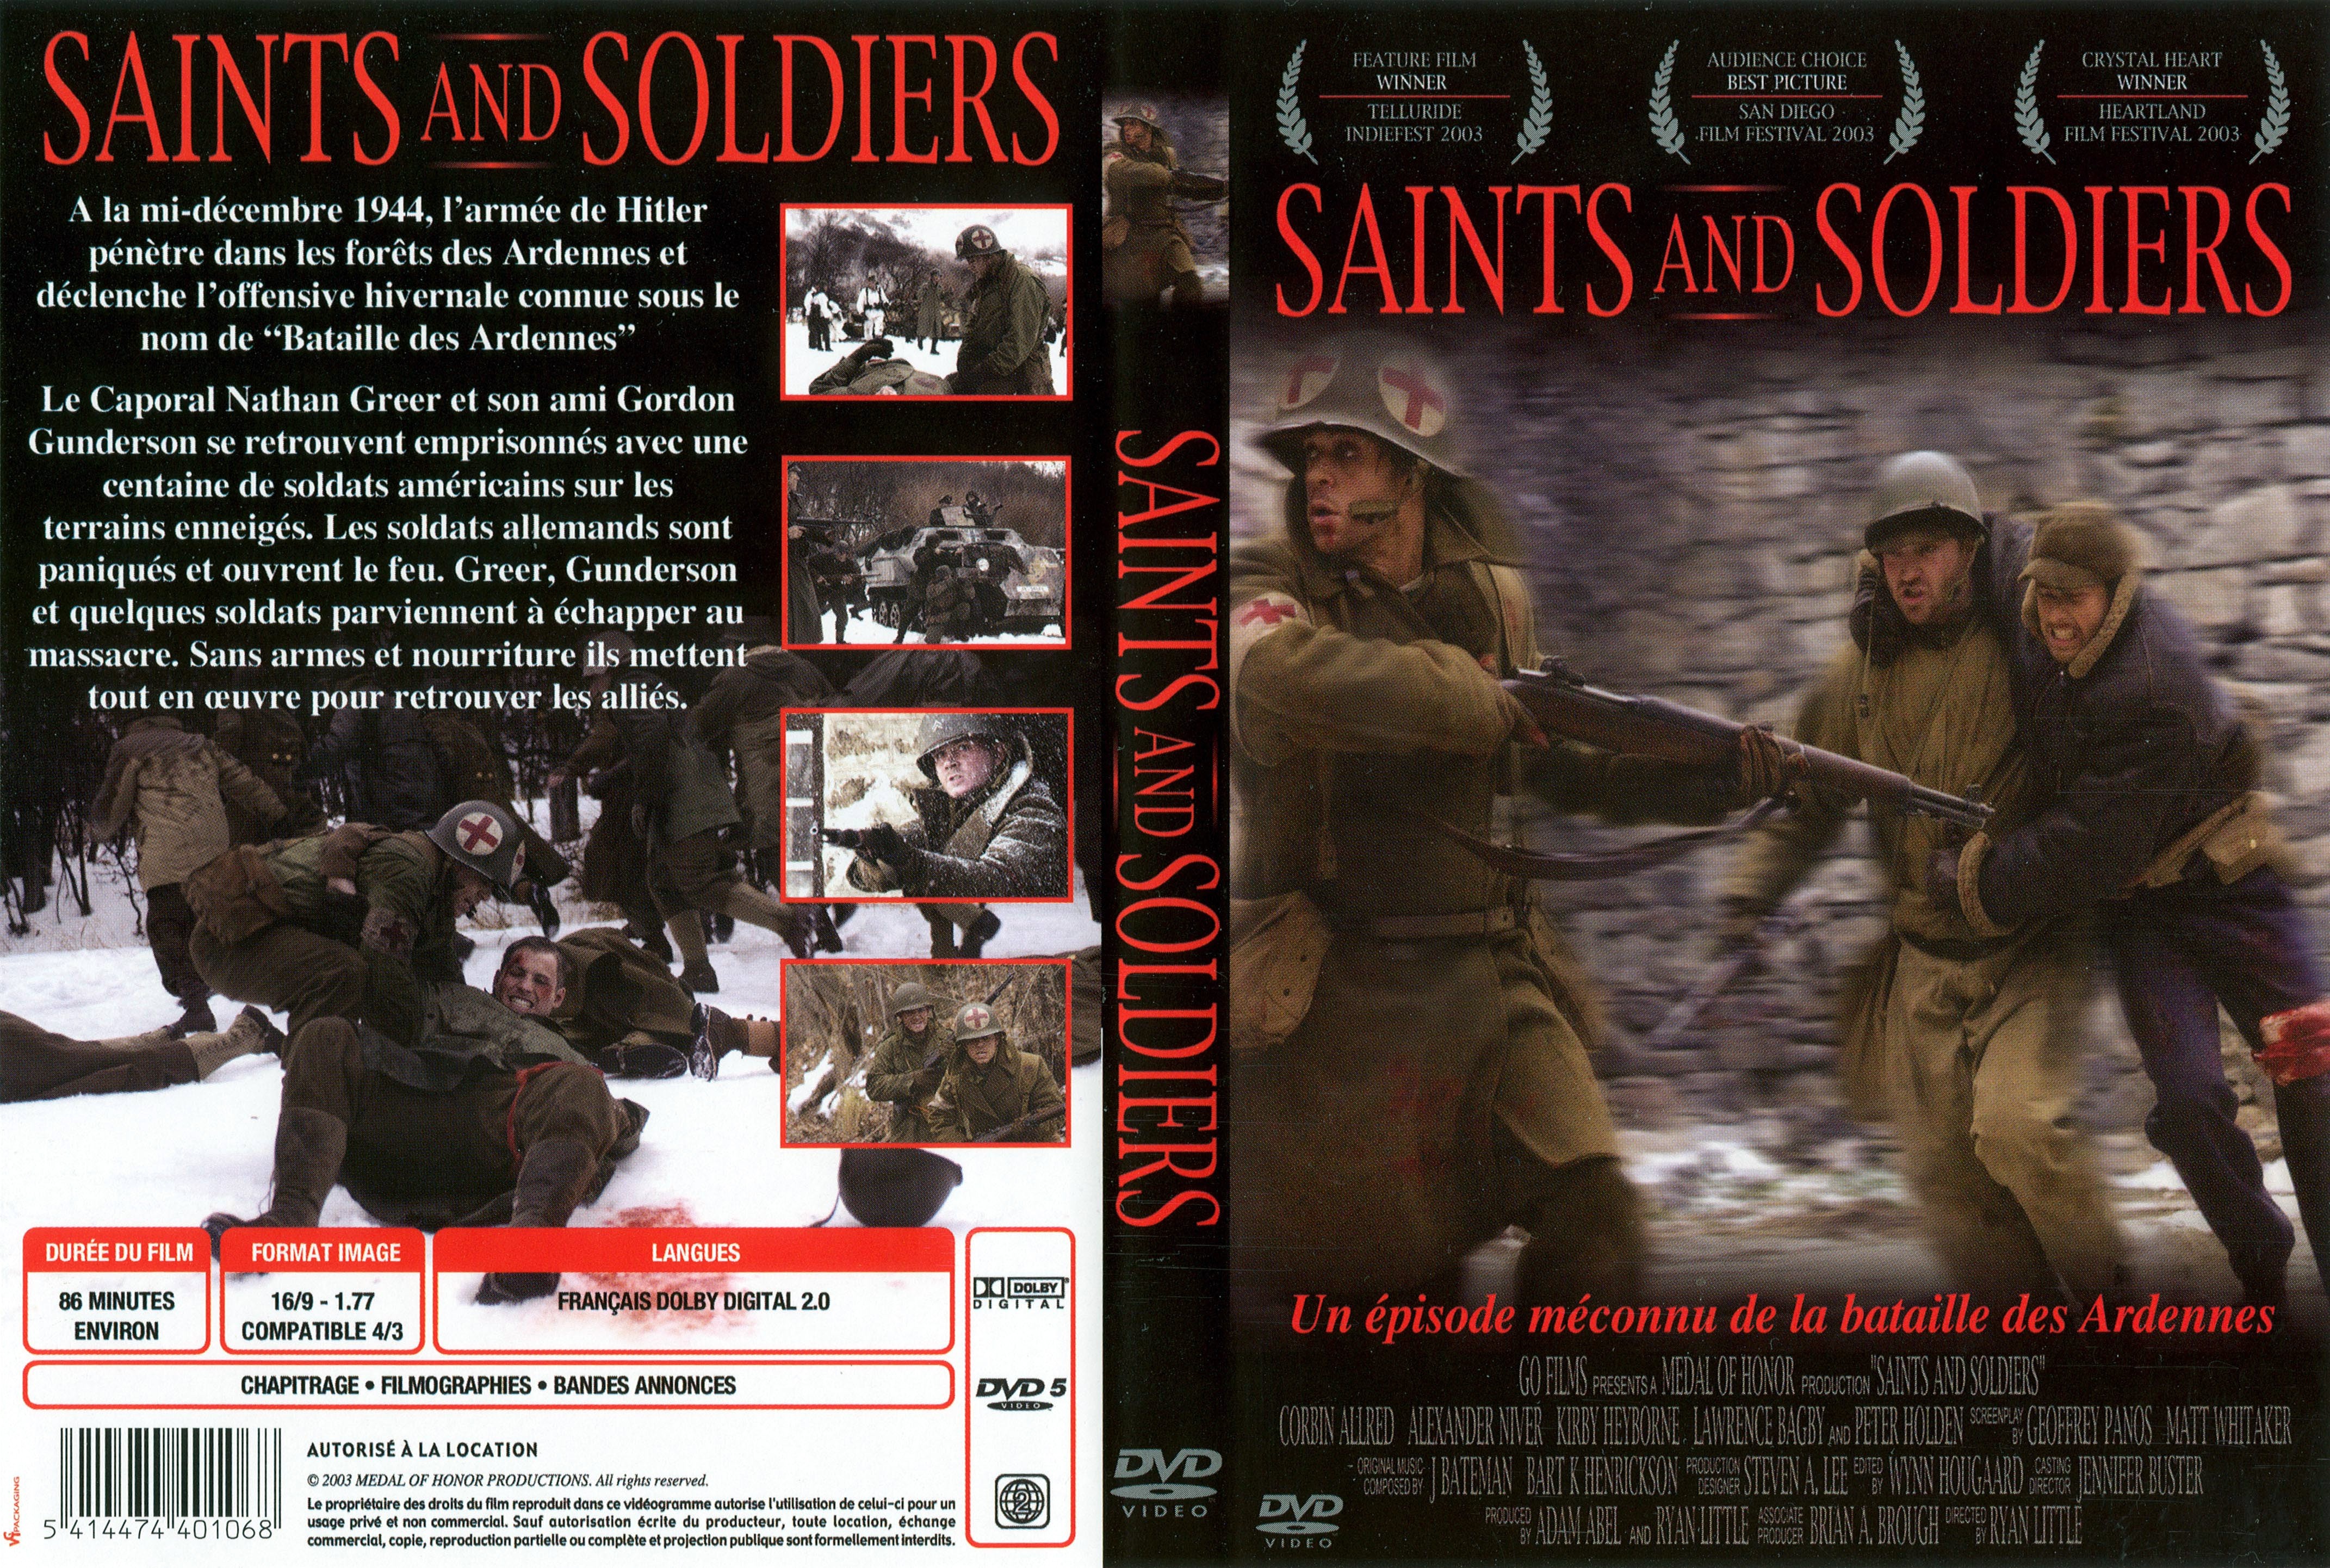 Jaquette DVD Saints and soldiers